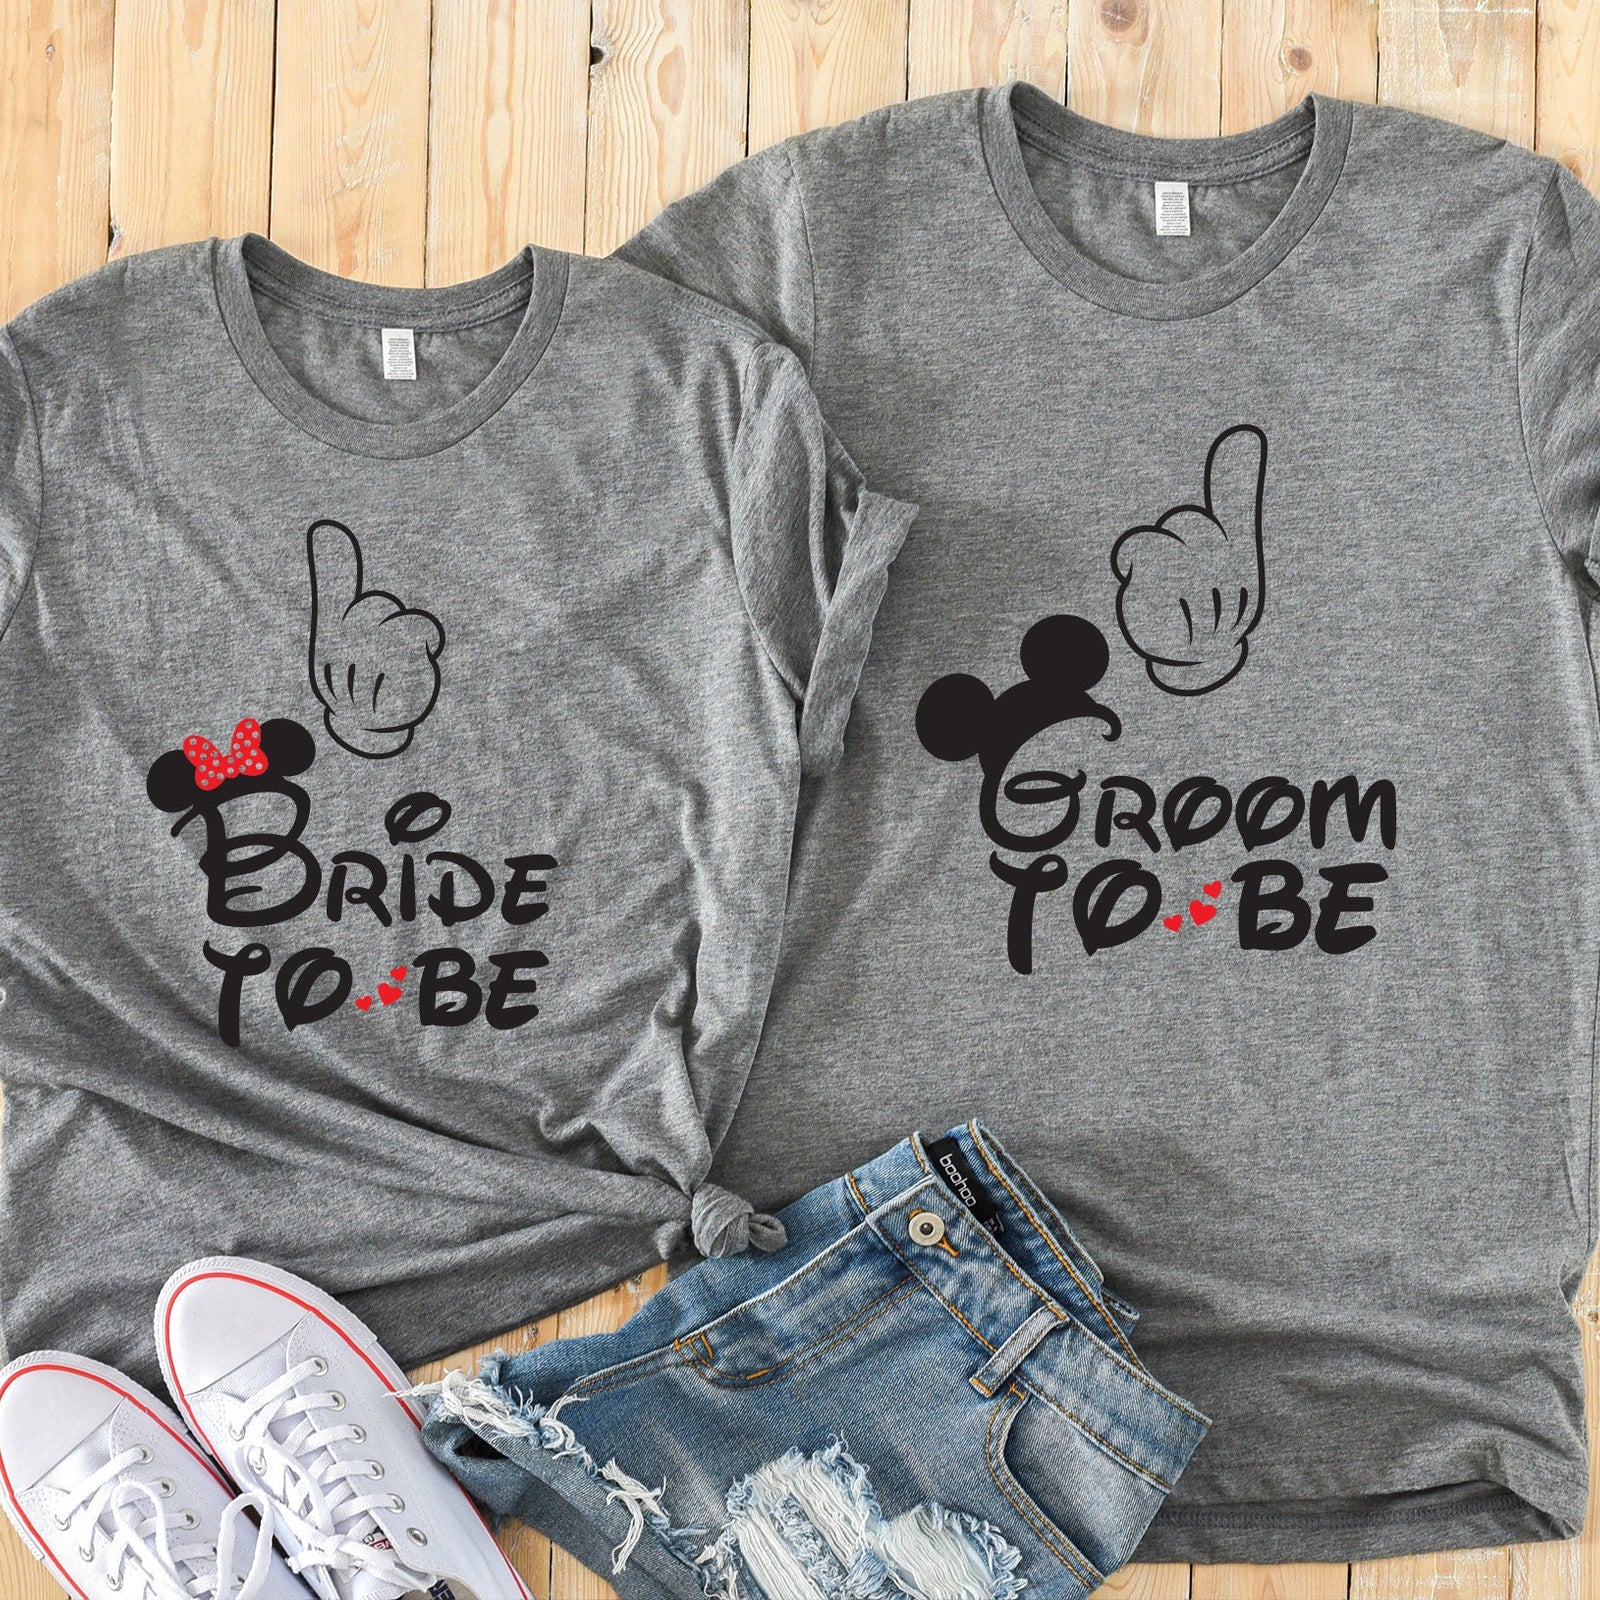 Bride to Be and Groom to Be Unisex Adult Shirts - Disney Couples Shirt - Cute Disney Matching Shirts - Minnie Mickey Couple Shirt